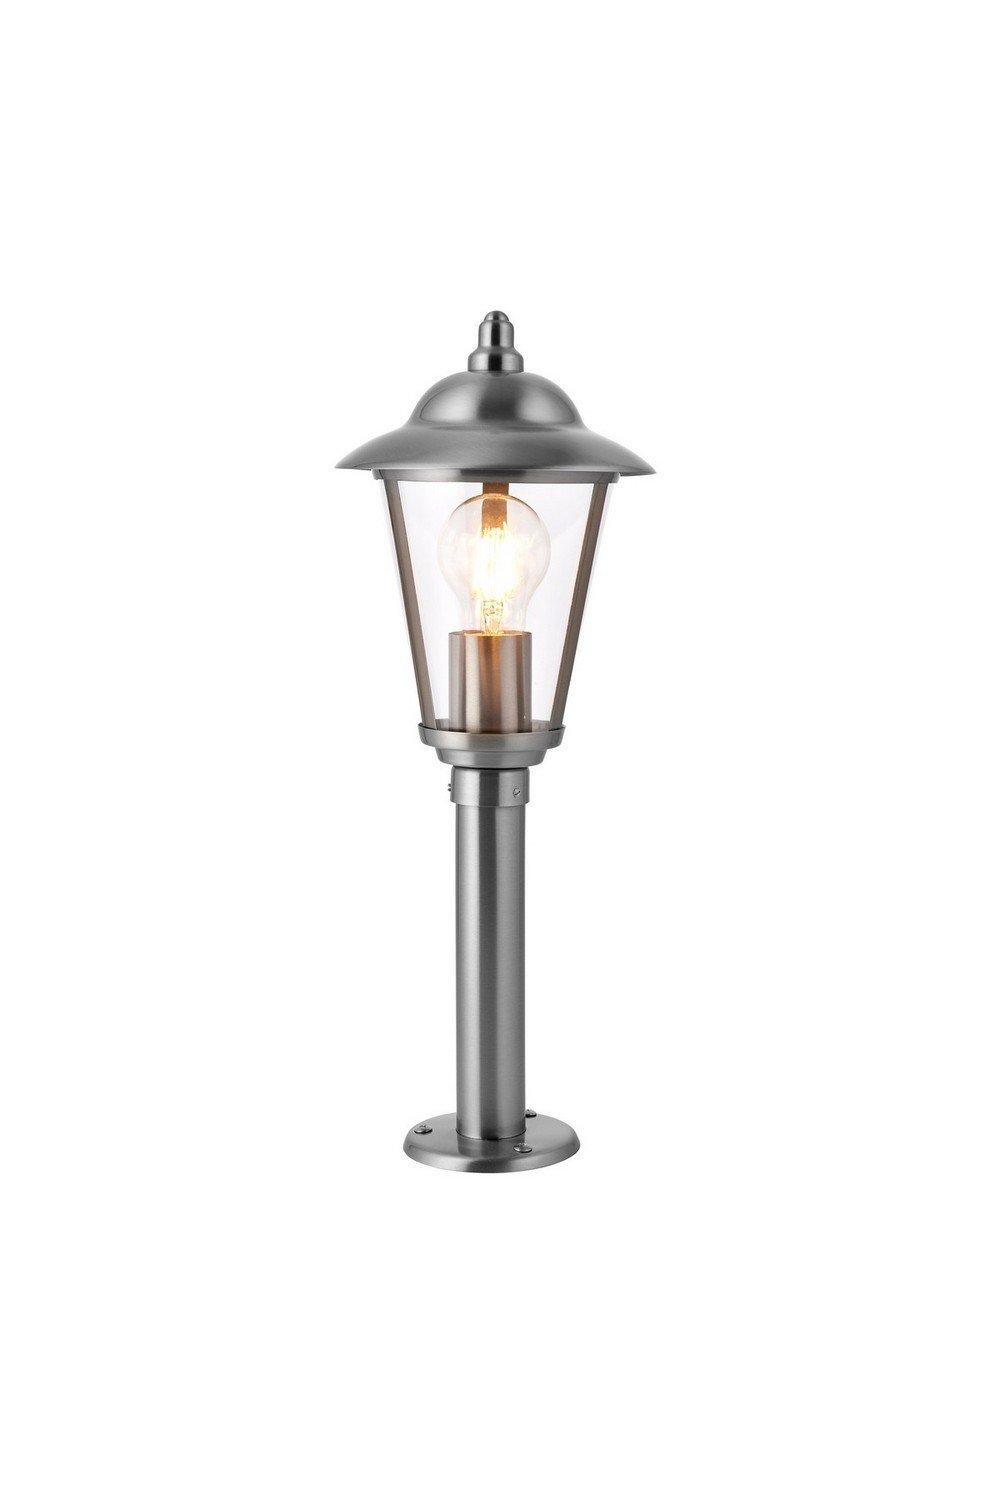 Klien Outdoor Bollard Light Polished Stainless Steel Clear Polycarbonate IP44 E27